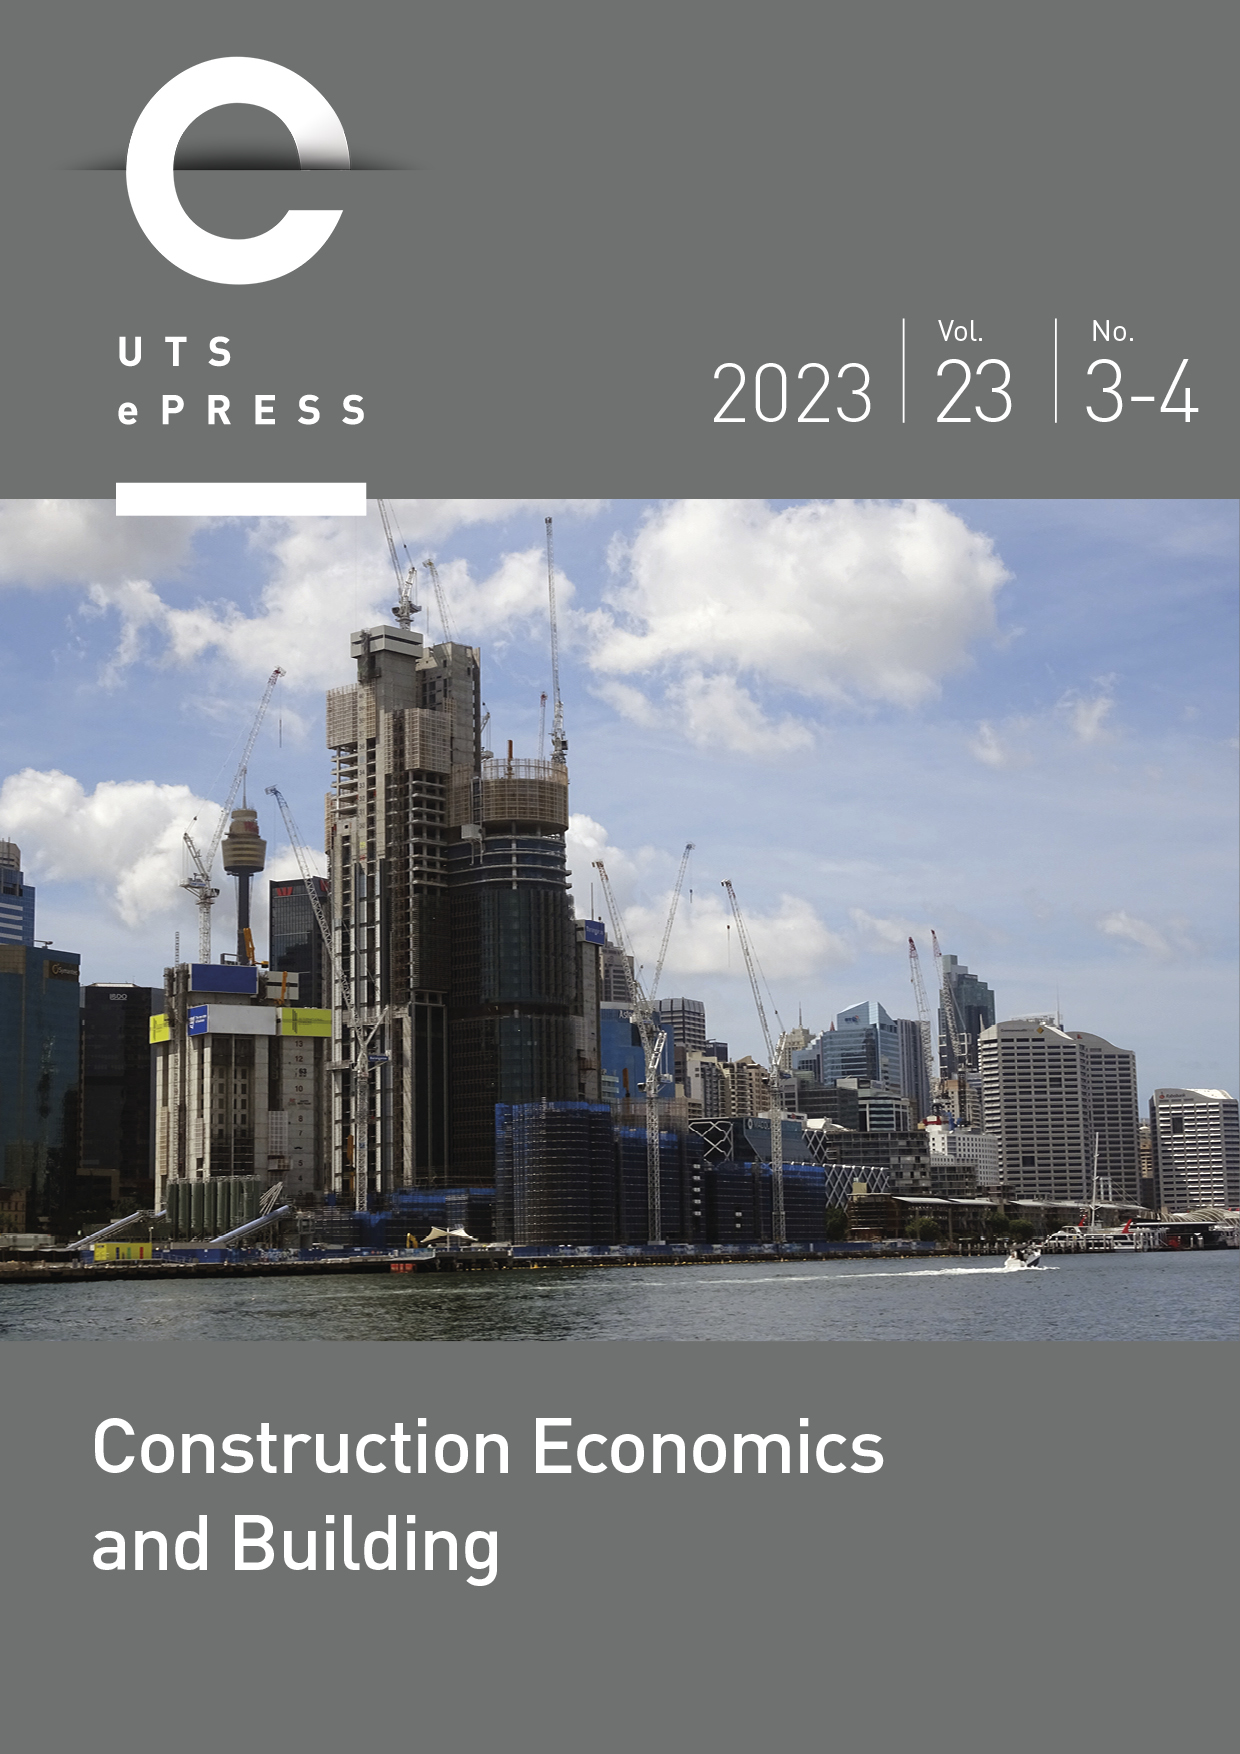 "Construction Economics and Building" 2023 Volume 23 Number 3/4 cover